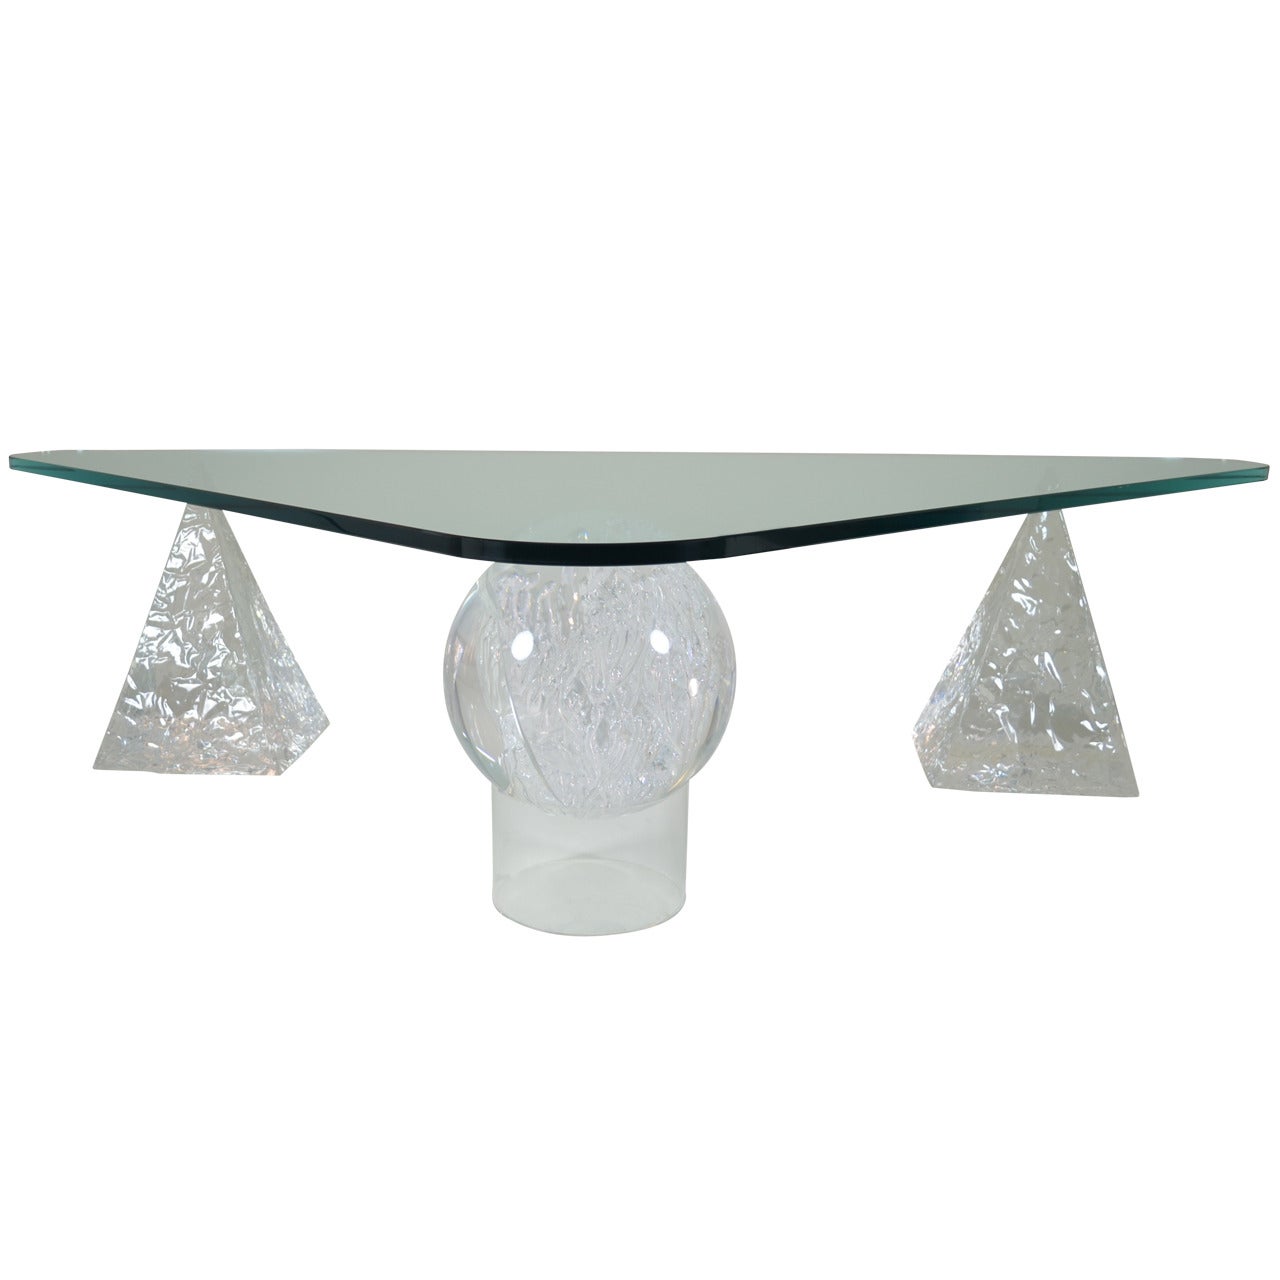 Geometric Lucite Based Cocktail Table